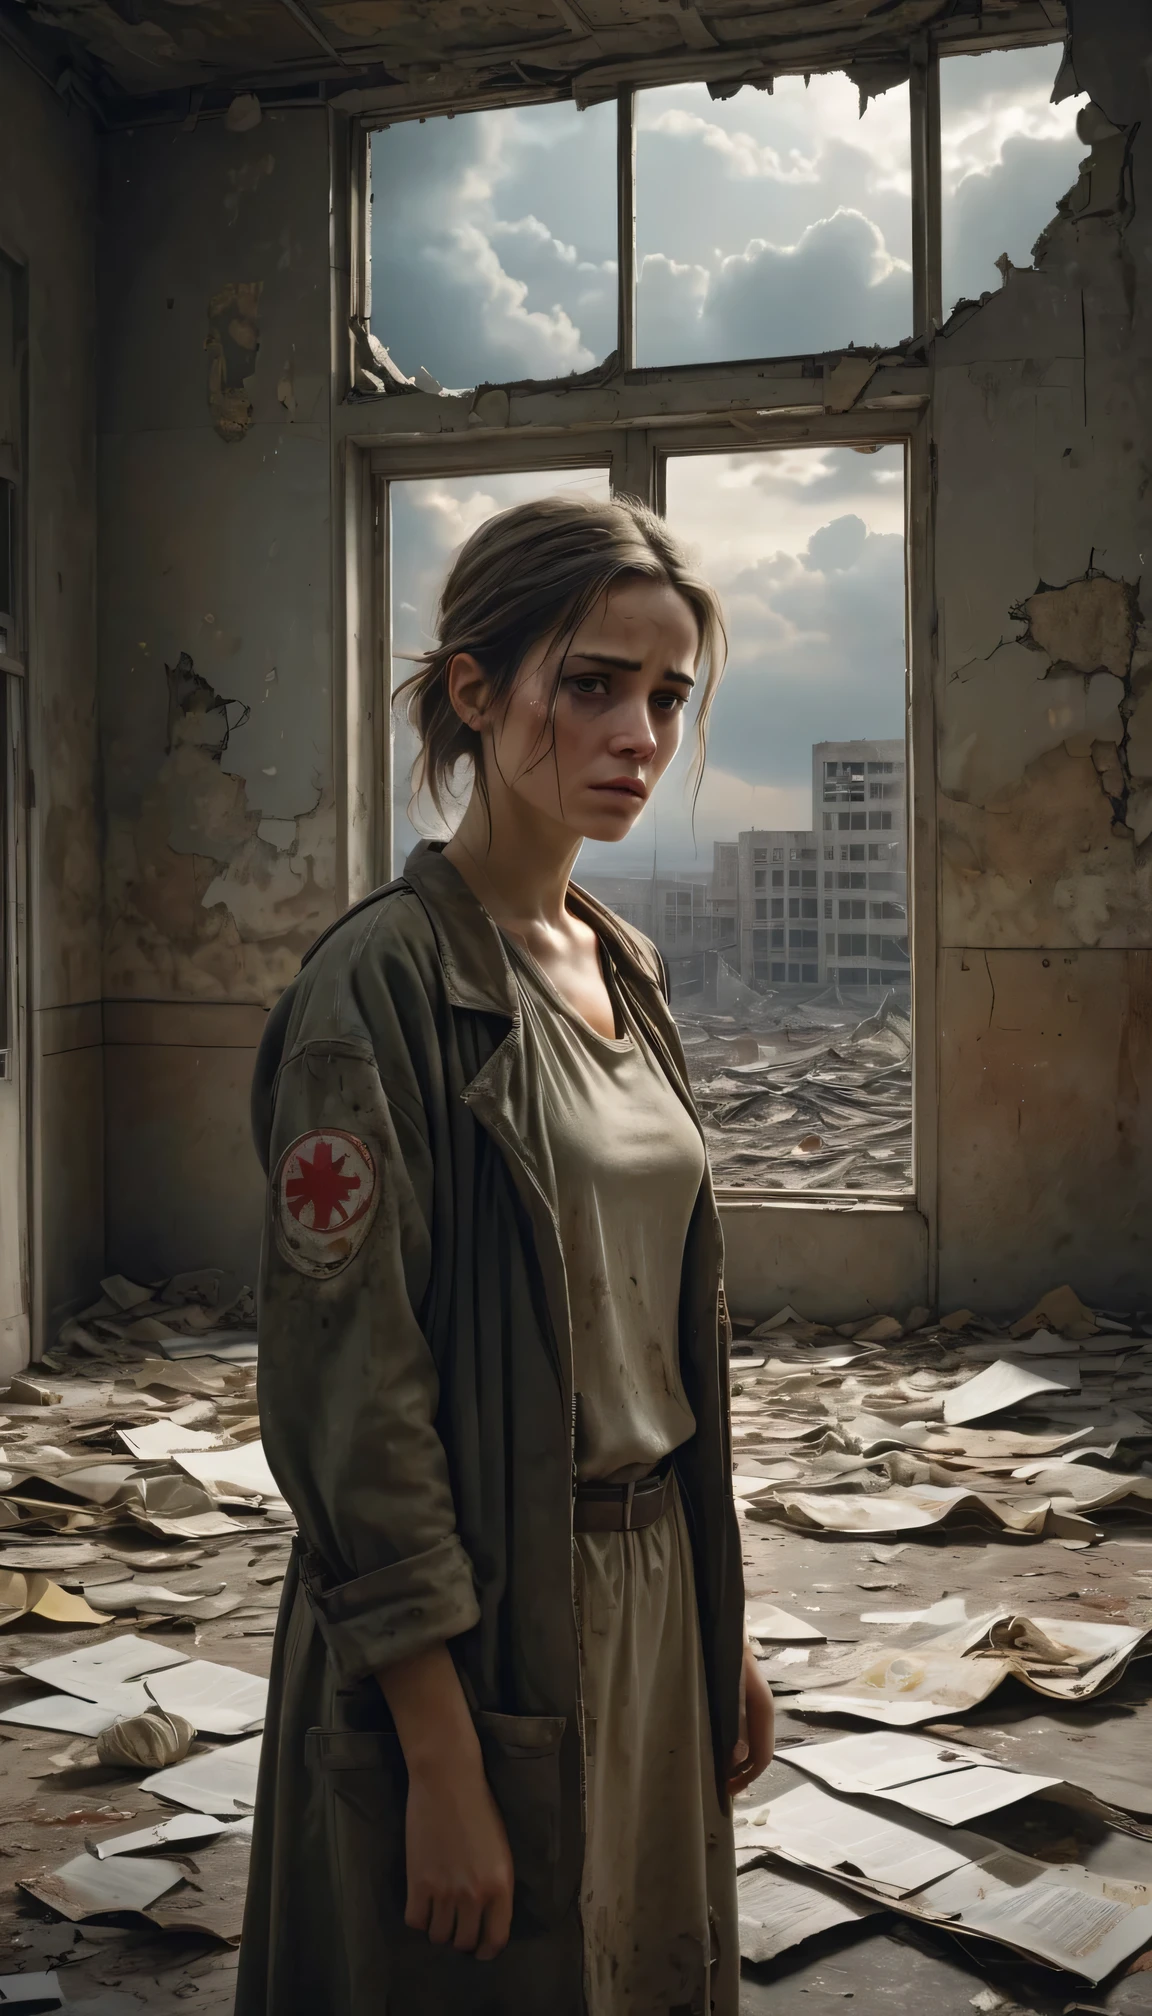 (best quality,4k,8k,highres,masterpiece:1.2),ultra-detailed,post-apocalyptic wasteland,desolate hospital,barren landscape,indoor,dusty atmosphere,overgrown with weeds,ruined buildings,crumbling walls,injured girl, a stretcher,abandoned medical equipment,flickering dim lights,shattered windows,faint sunlight peeking through the cracks,silence interrupted by distant echoes,decaying furniture and belongings,mysterious medical experiments,empty corridors and hallways,sadness in her realistic,photorealistic:1.37 eyes,dirty bandages,makeshift bandages,desperation on her face,anguished expression,muted colors,ominous clouds in the sky,ruined cityscape in the background,tattered clothes,hope in her eyes,scattered papers and documents,decipherable symbols on the walls,evocative art style,contrast between destruction and resilience,heart-wrenching story hidden within the scene